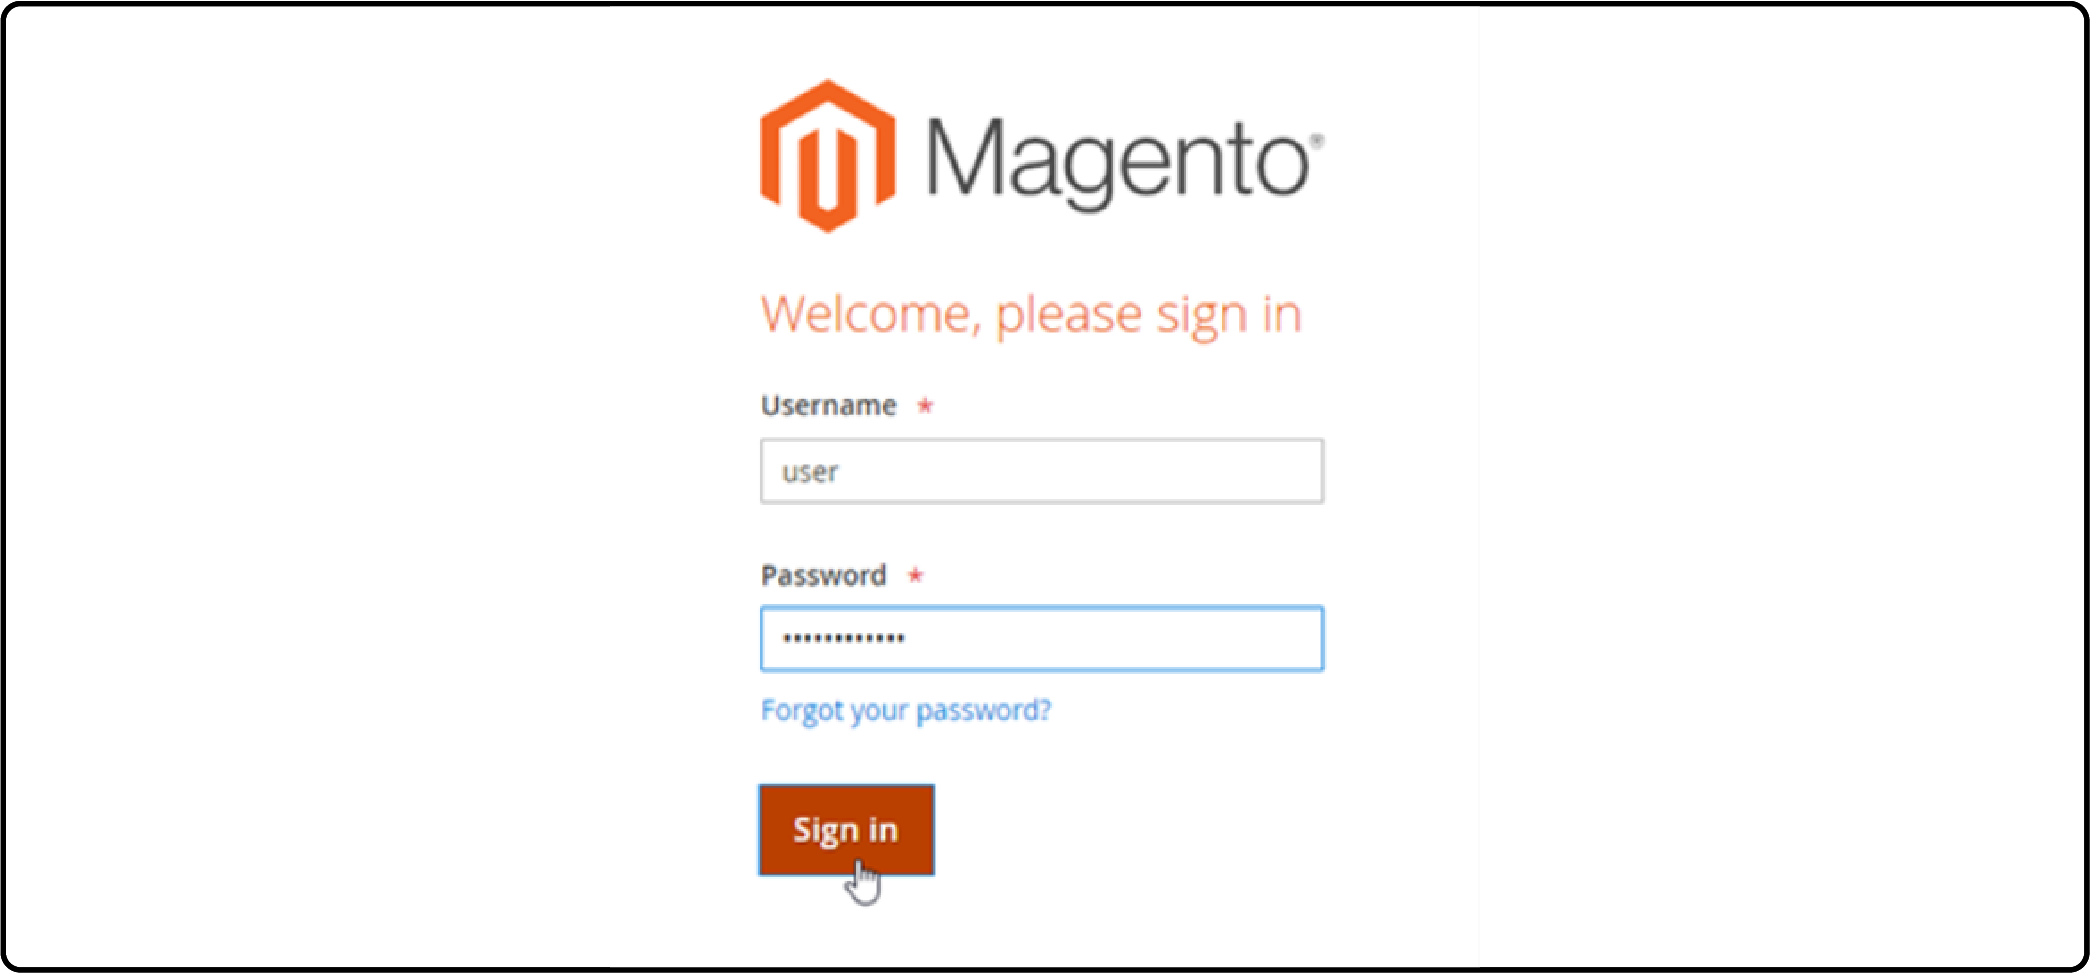 Configure Magento settings on AWS Lightsail instance